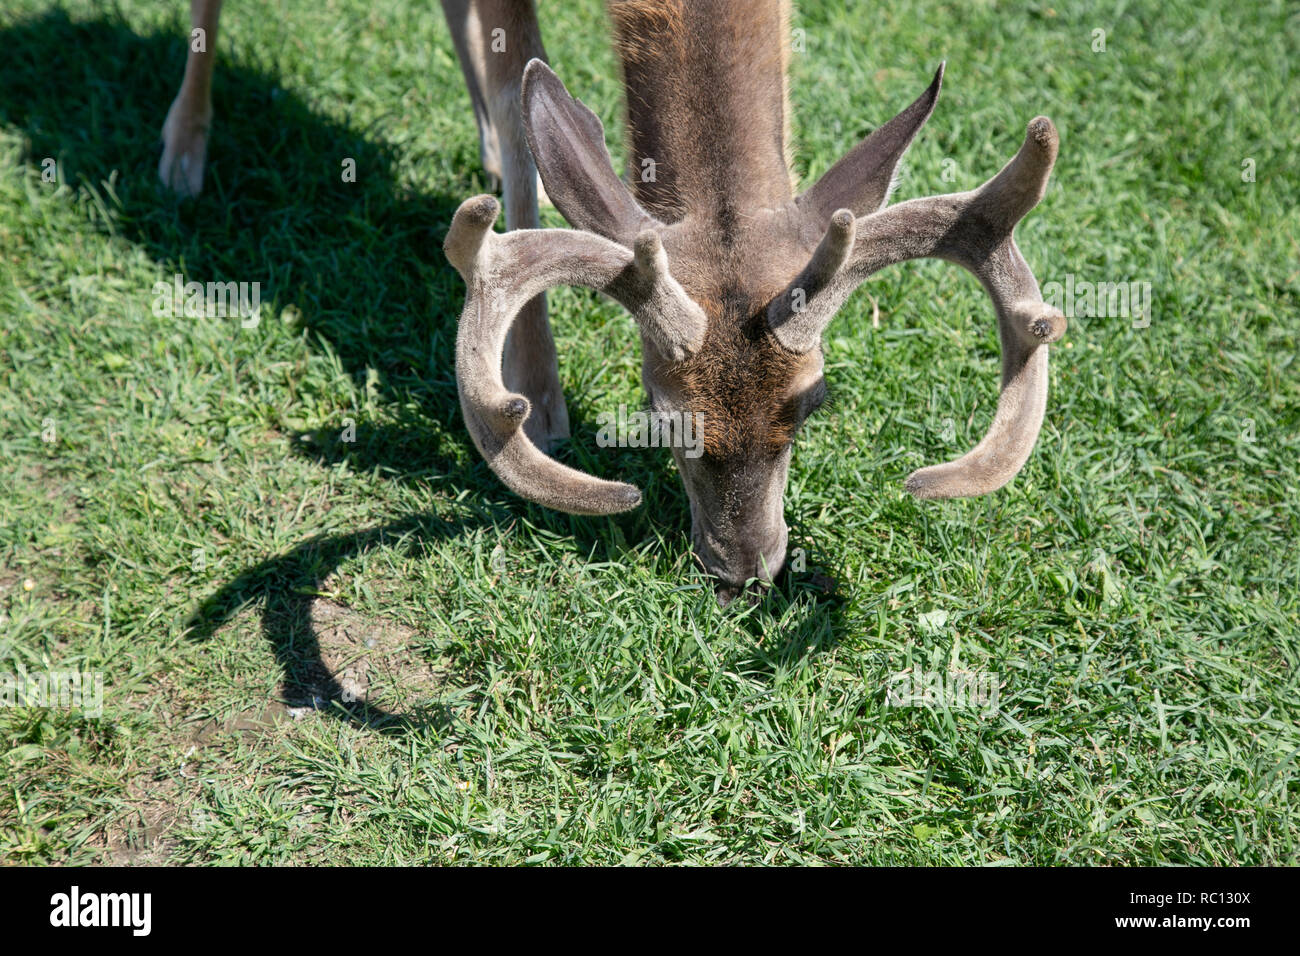 Close up of a deer head eating grass in Omega park, Canada, sunny summer day Stock Photo